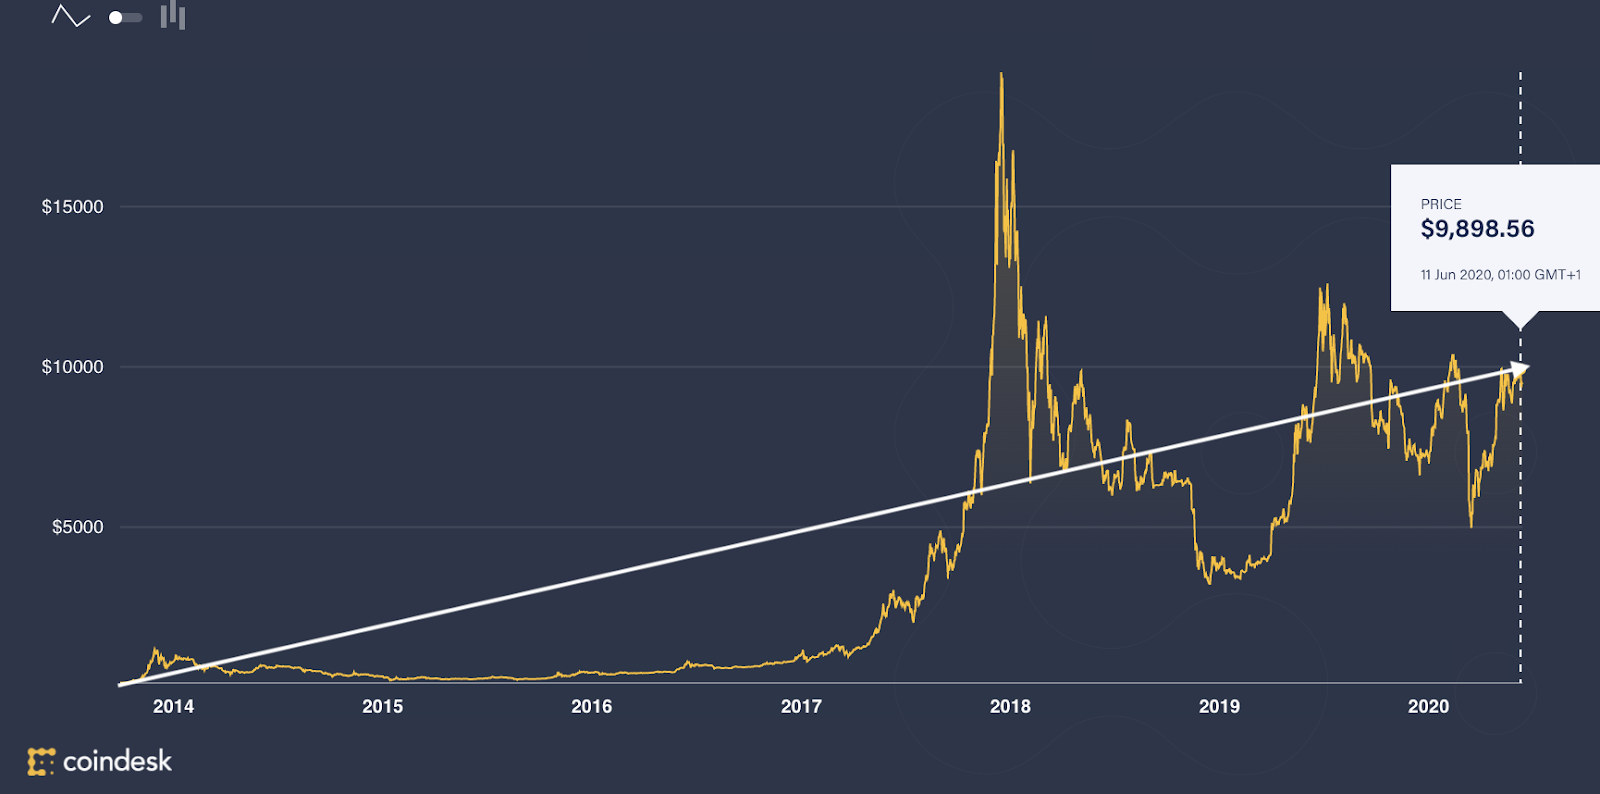 Cryptocurrencies: Graph showing the value of bitcoin from 2014 to 2020